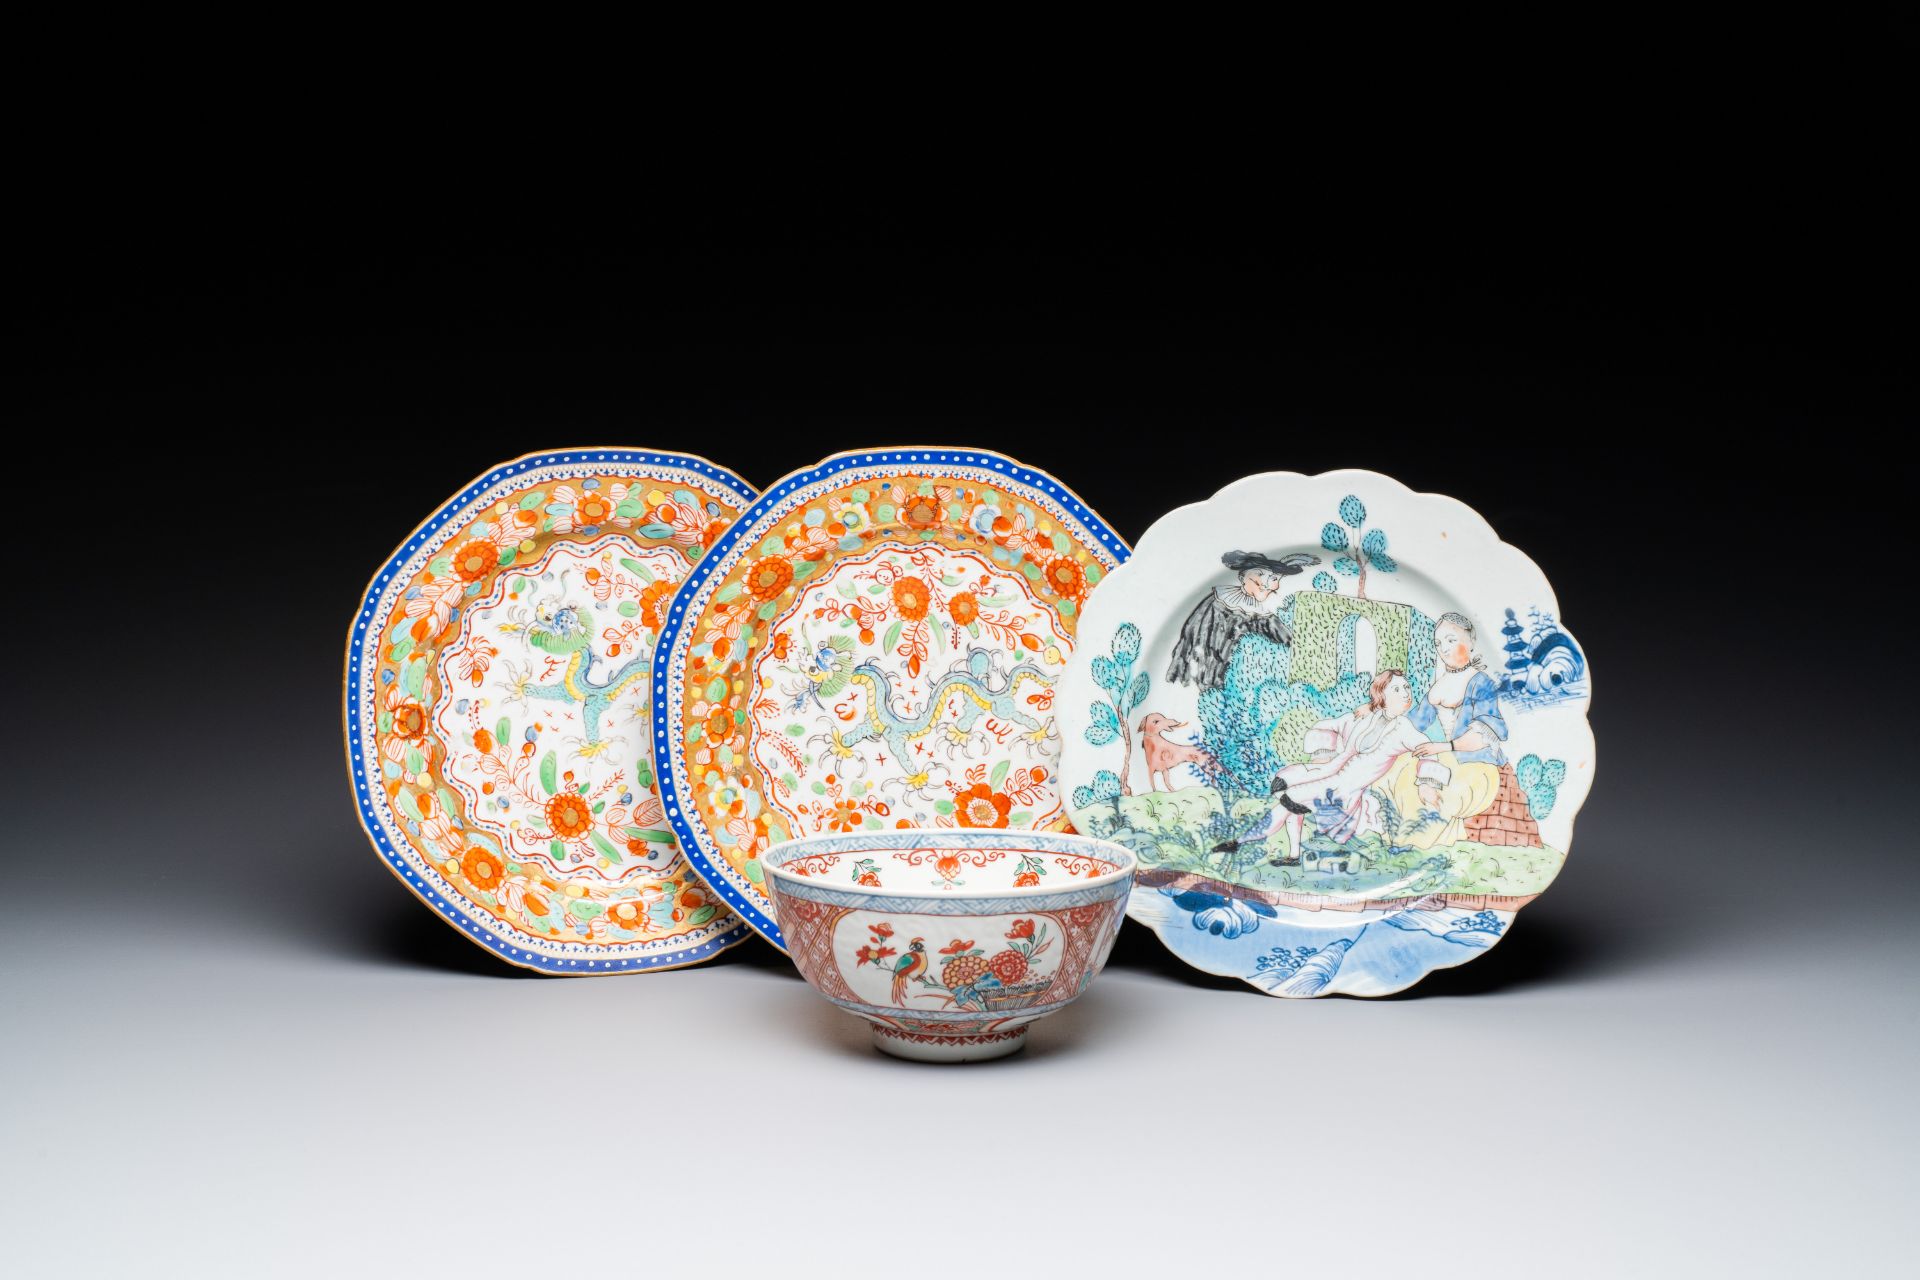 A pair of Chinese English-decorated plates and a Dutch-overdecorated Chinese bowl and plate, Qianlon